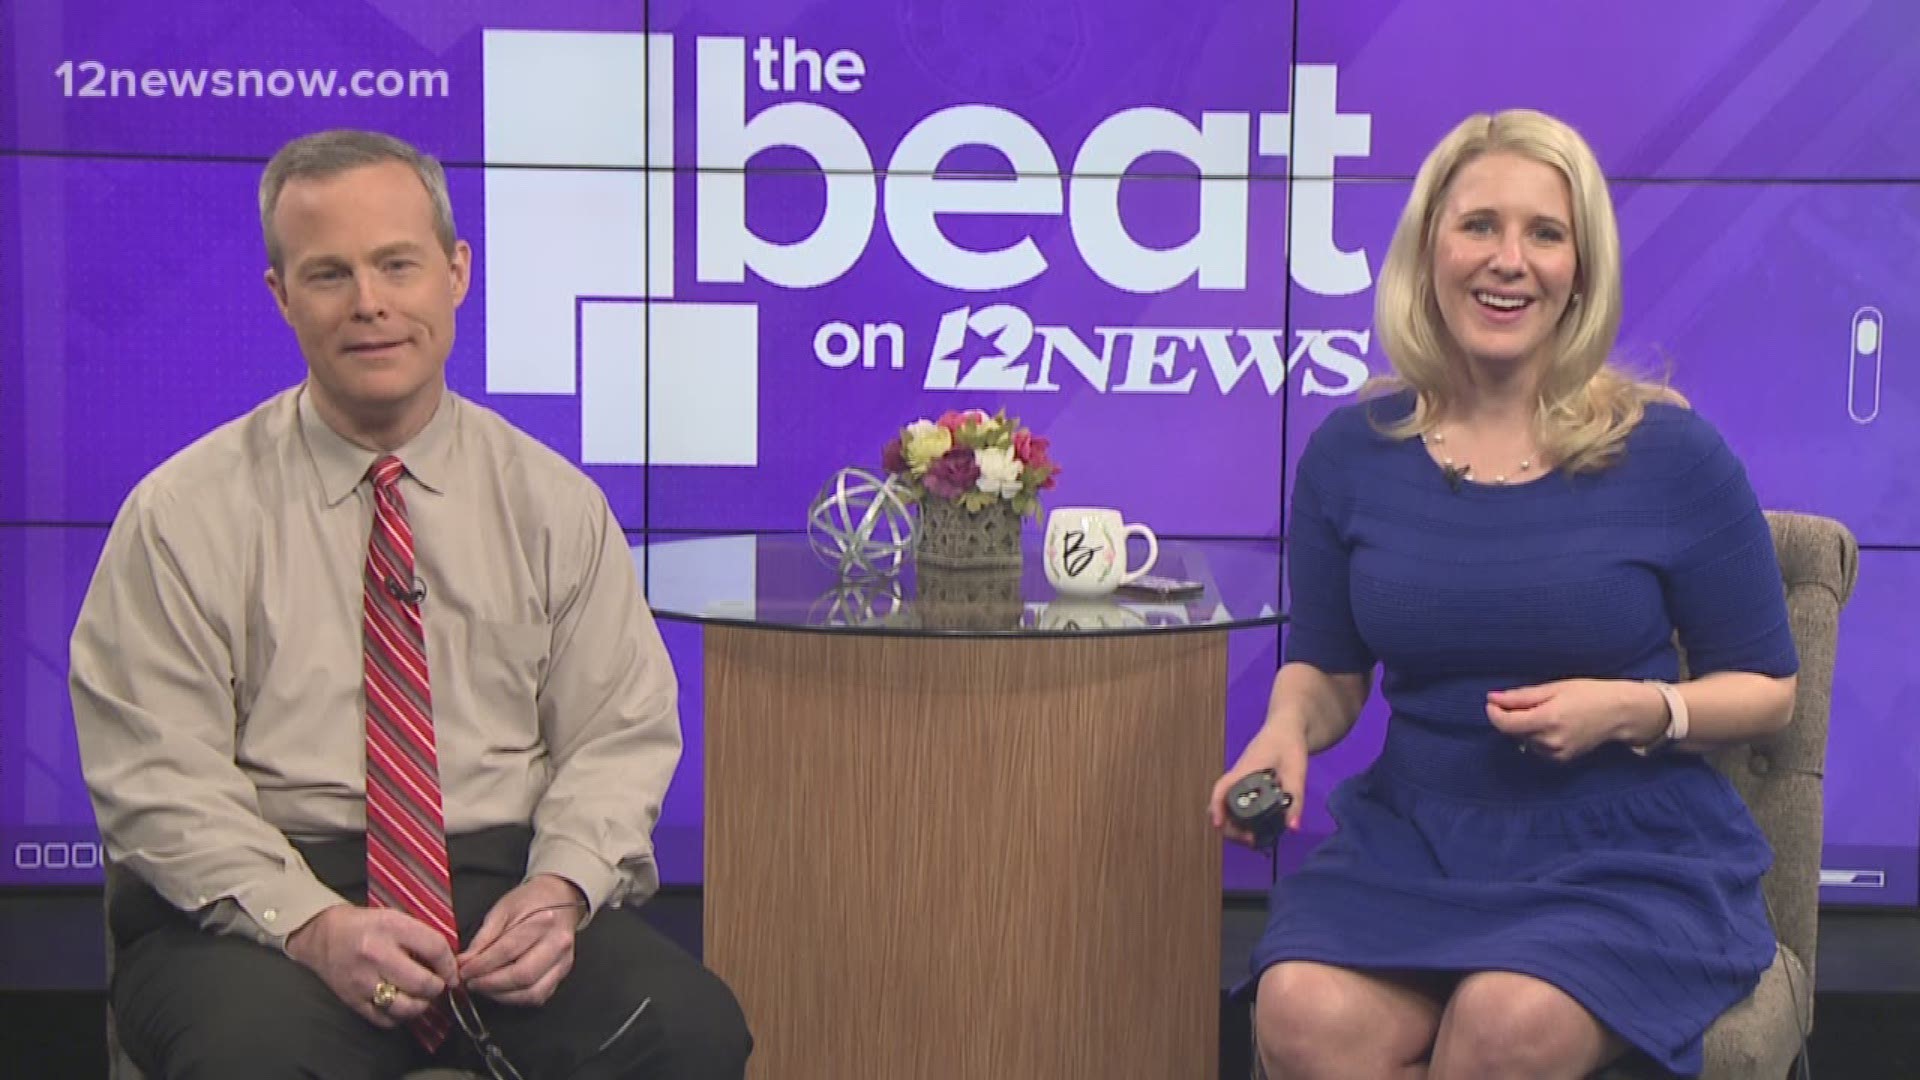 Share your jokes with us using #TheBeaton12